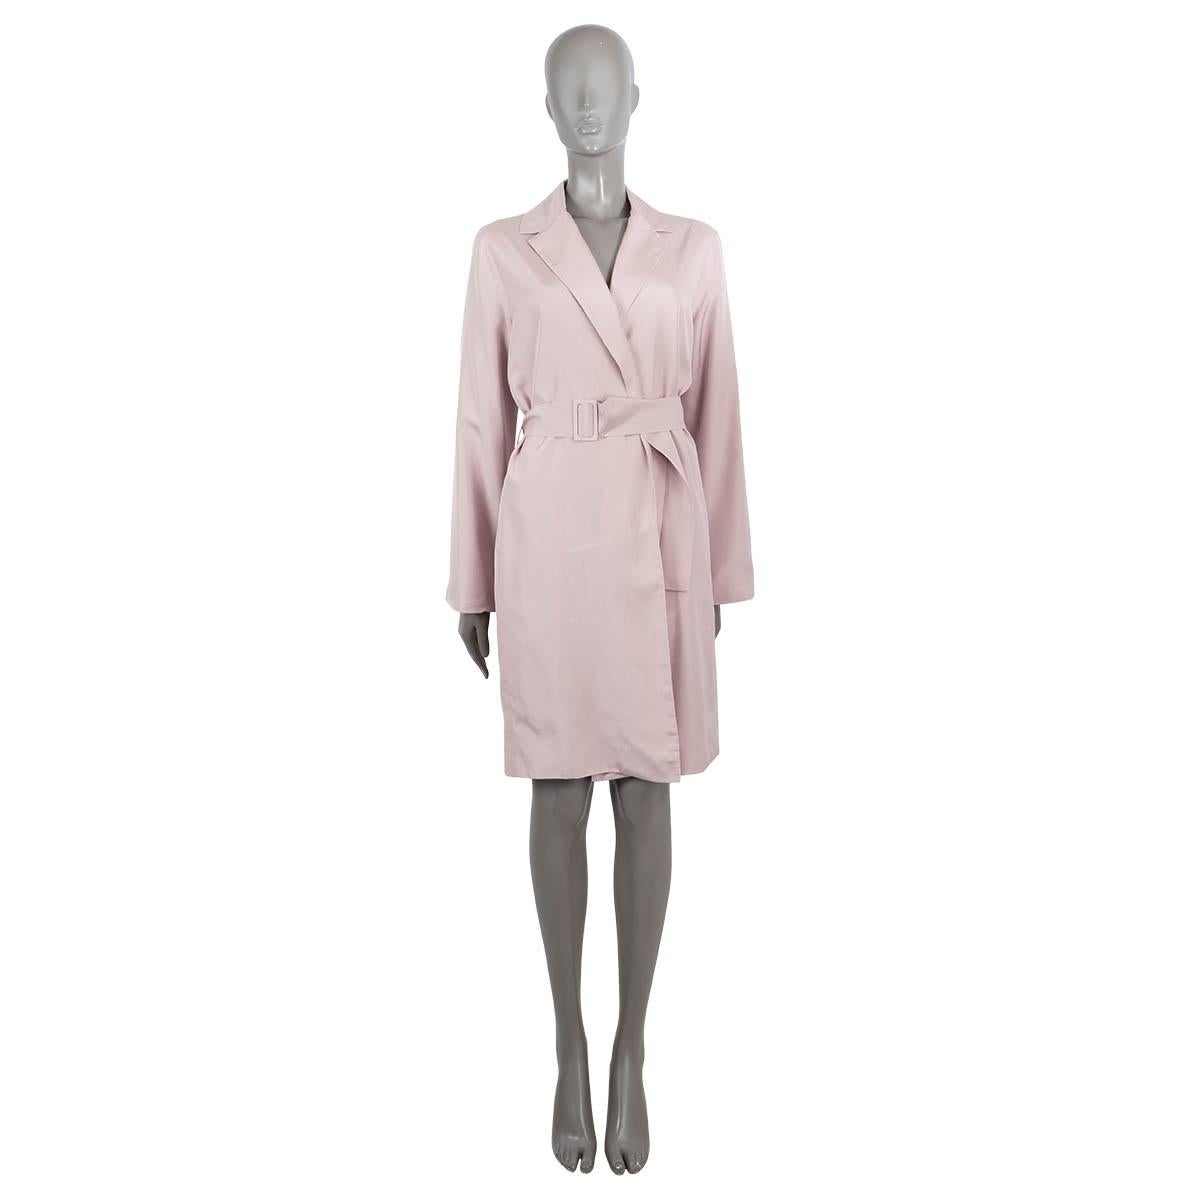 100% authentic The Row wrap coat in lilac silk (100%). Features notched lapels and slit pockets at the waist. Closes with a matching silk belt. Unlined. Has been worn and is in excellent condition.

Measurements
Tag Size	M
Size	M
Shoulder Width	47cm